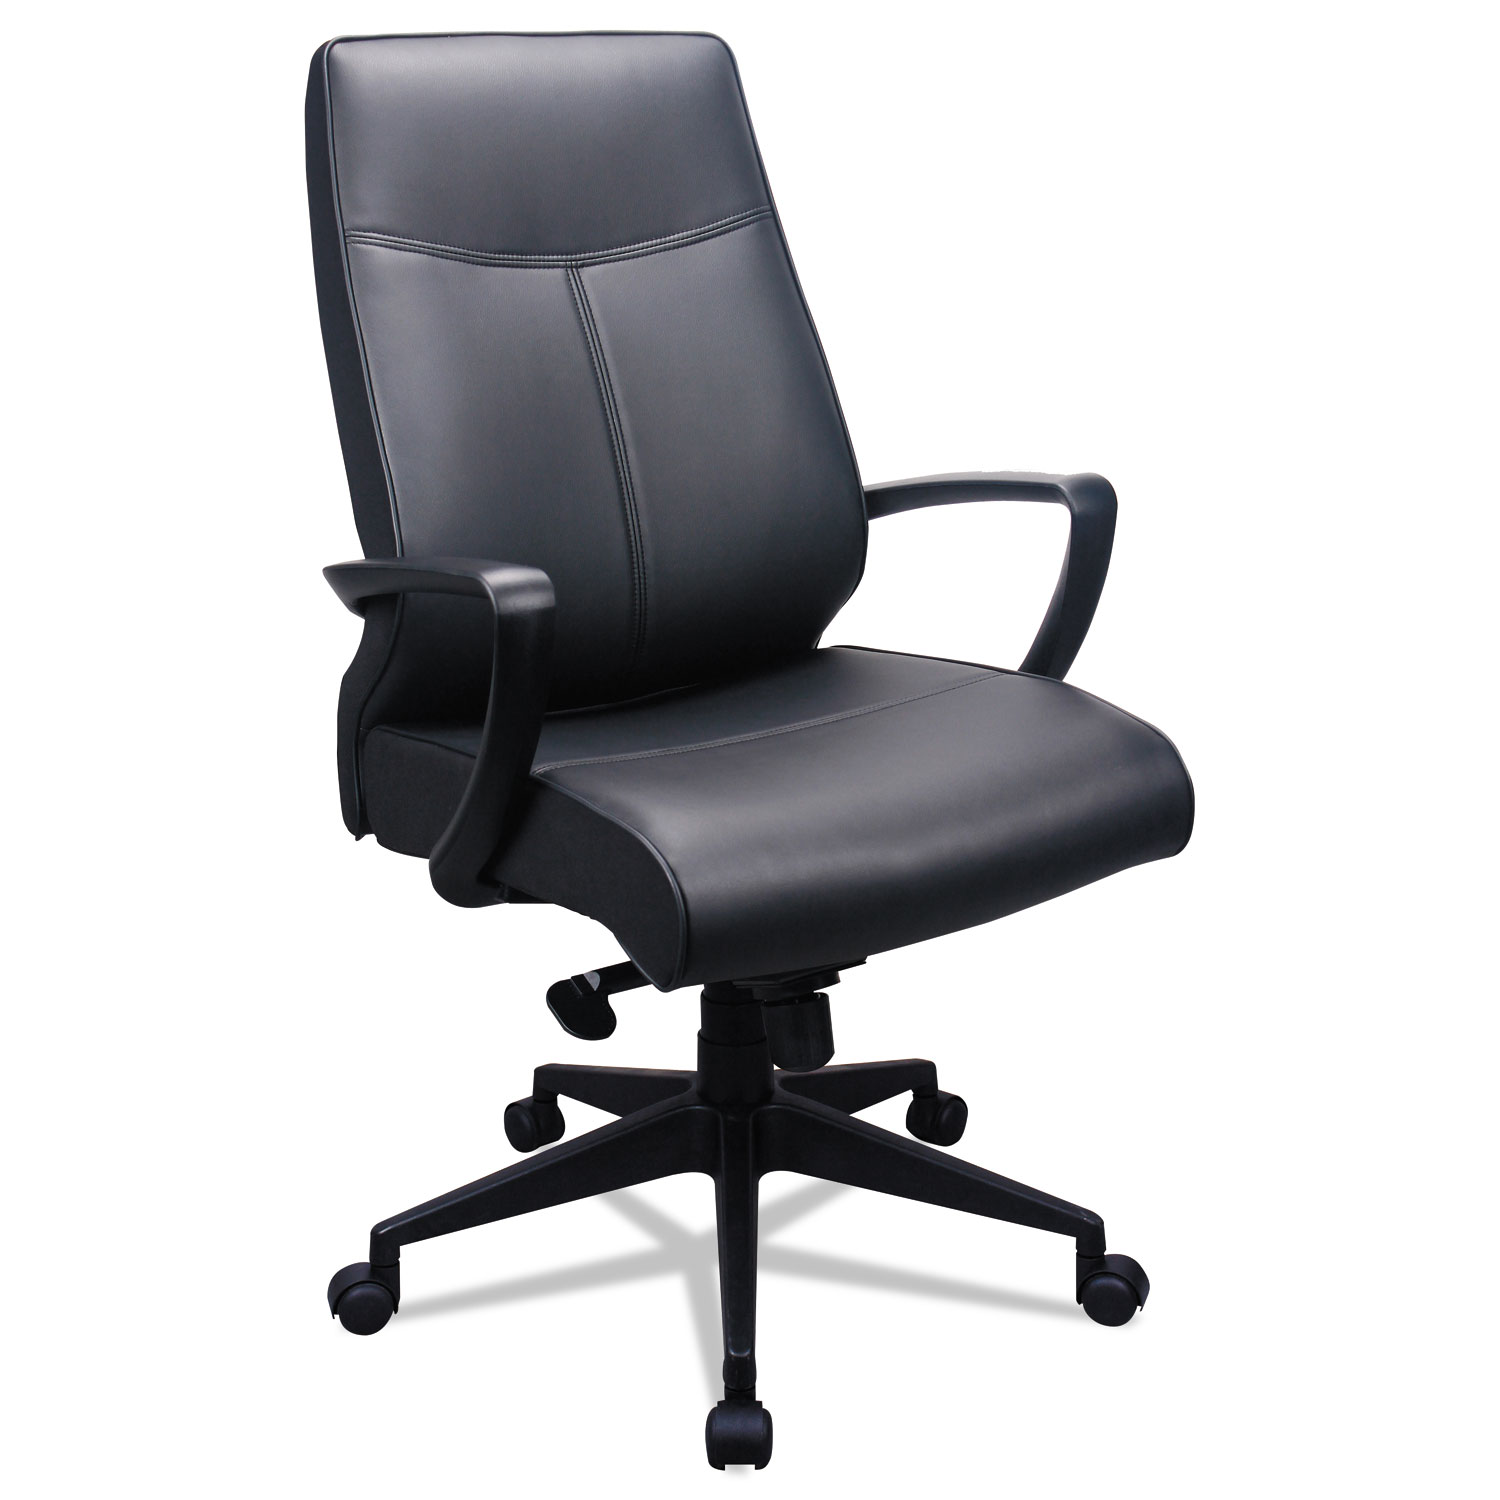 300 Leather High-Back Chair, Black Leather Seat/Back